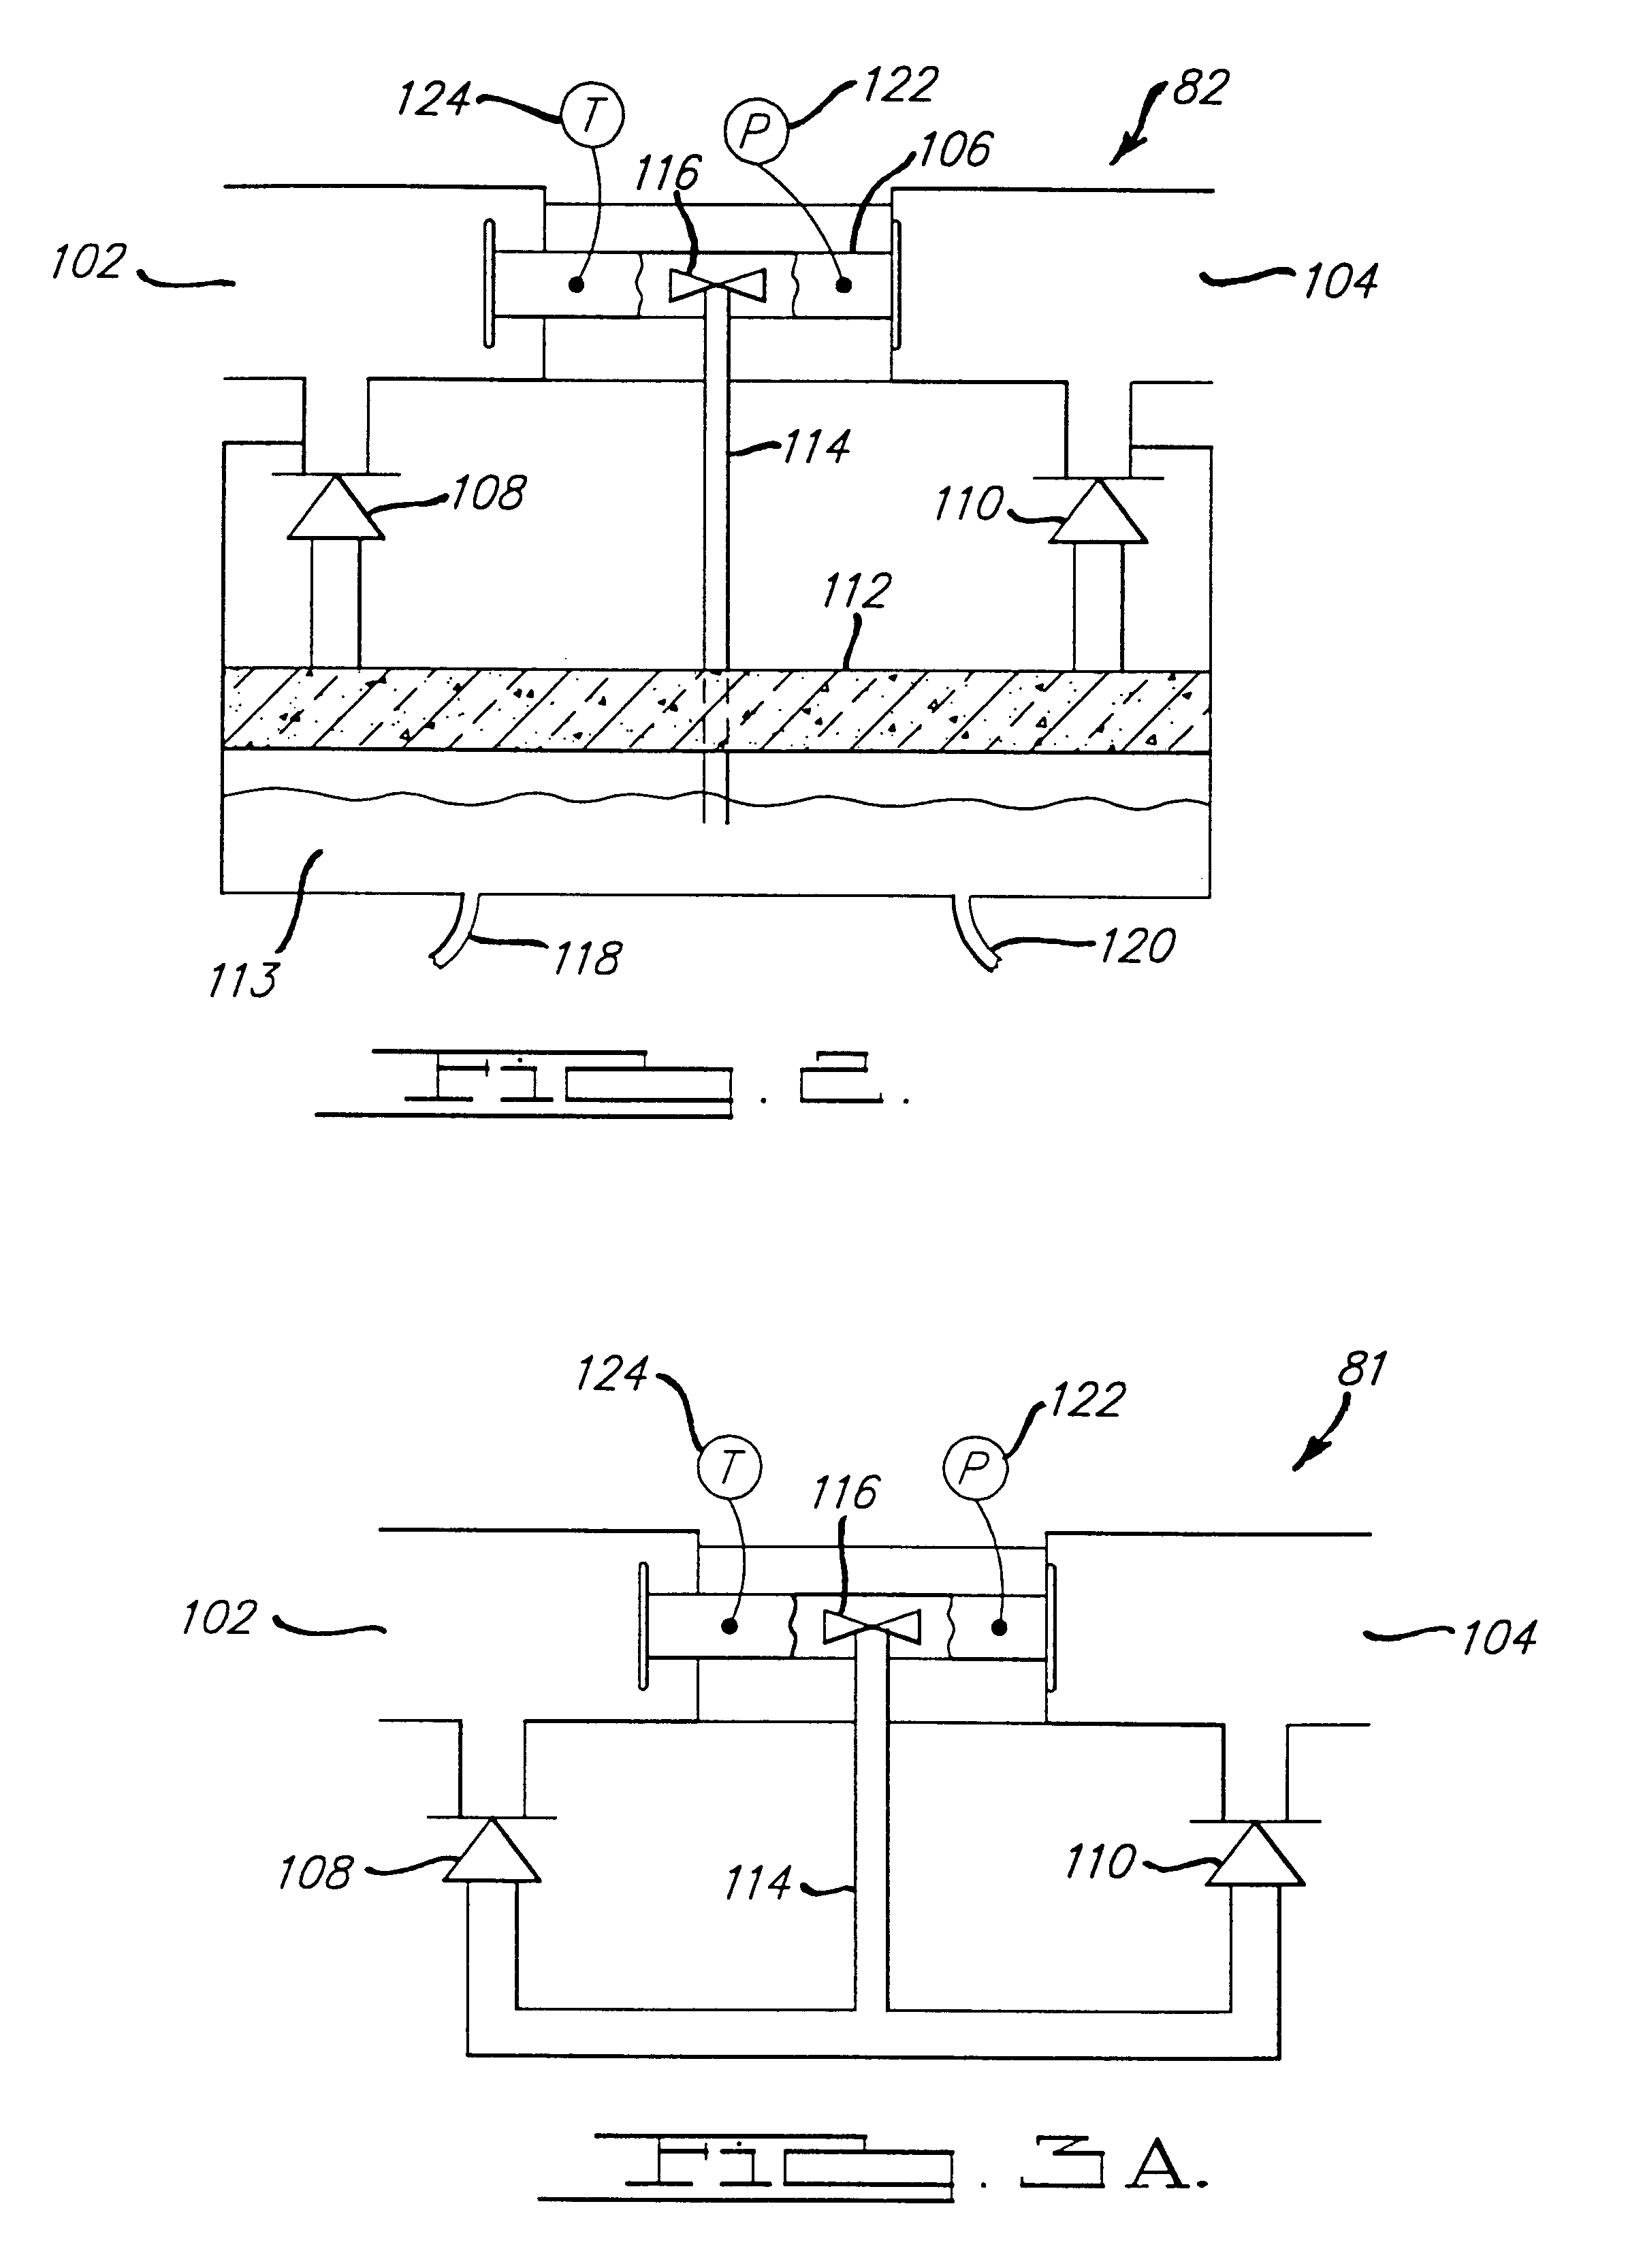 Air handling controller for HVAC system for electric vehicles